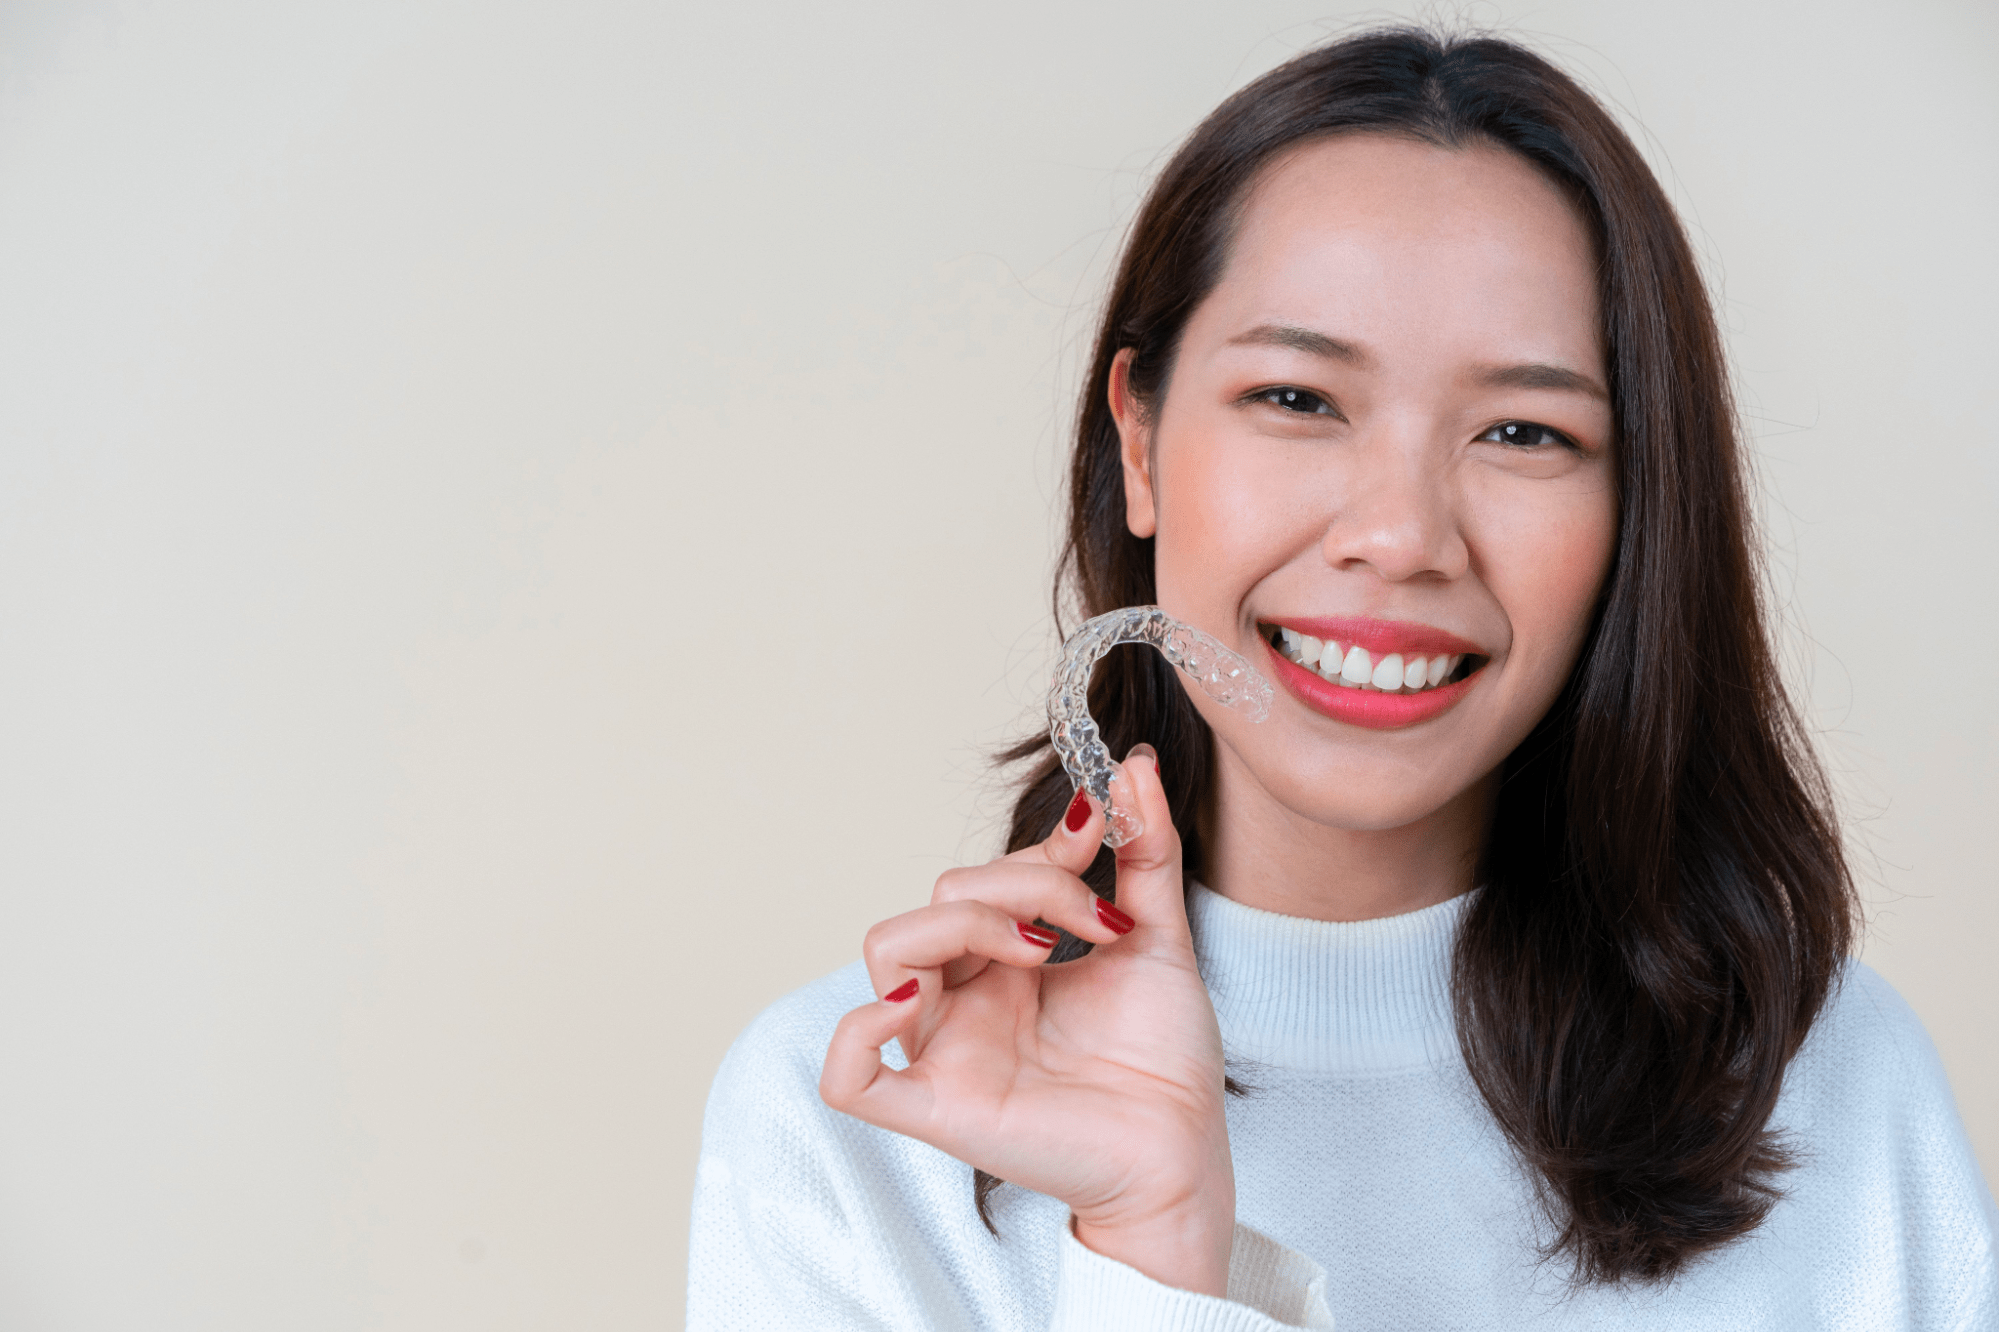 5 Keys To Creating Beautiful Smiles With Aligners